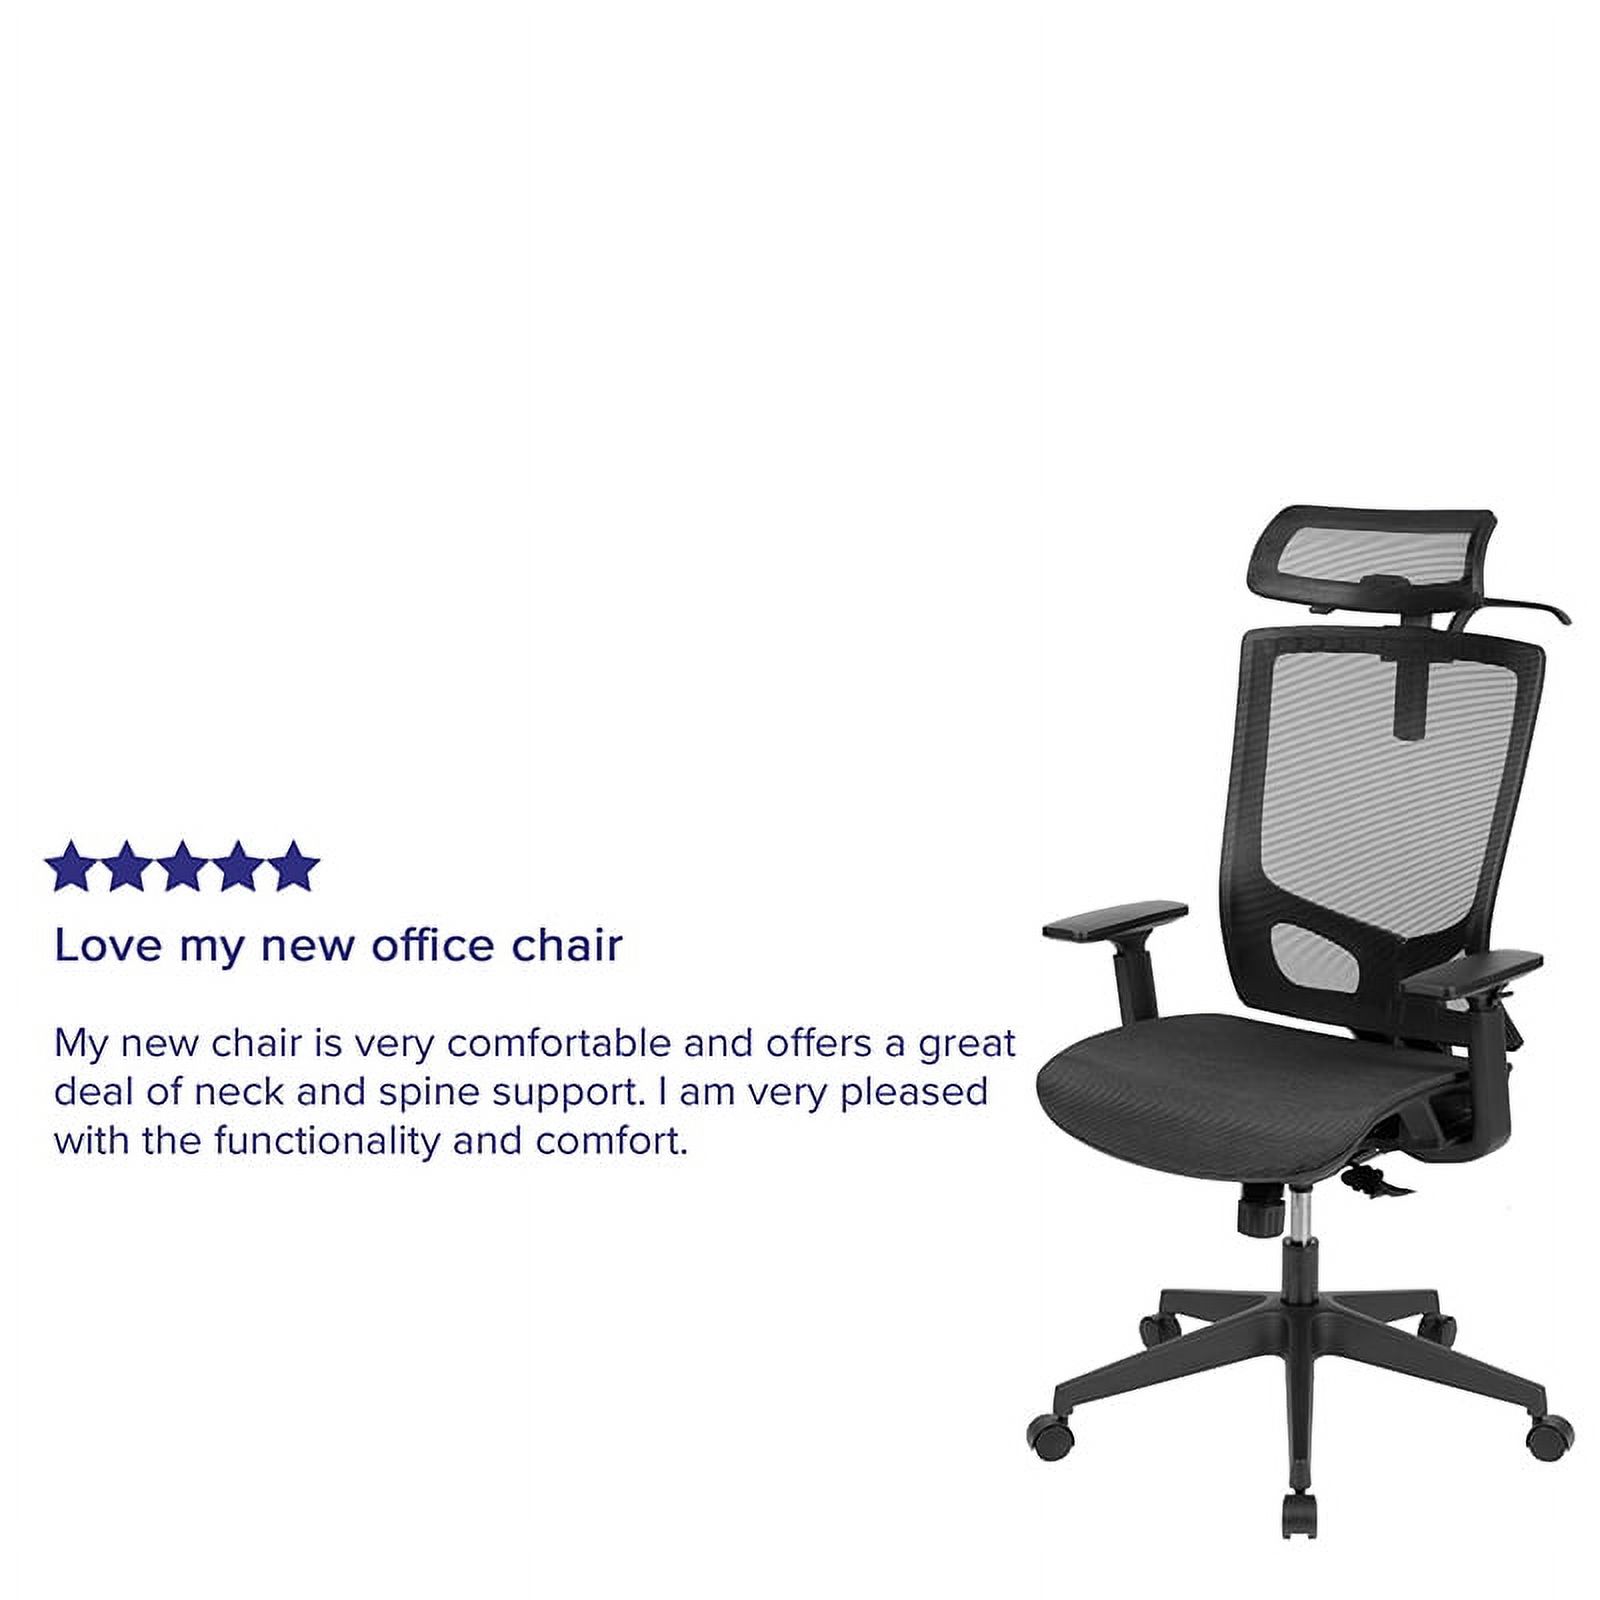 Flash Furniture Ergonomic Mesh Office Chair with Synchro-Tilt, Pivot Adjustable Headrest, Lumbar Support, Coat Hanger and Adjustable Arms in Black [H-2809-1KY-BK-GG] - image 4 of 5